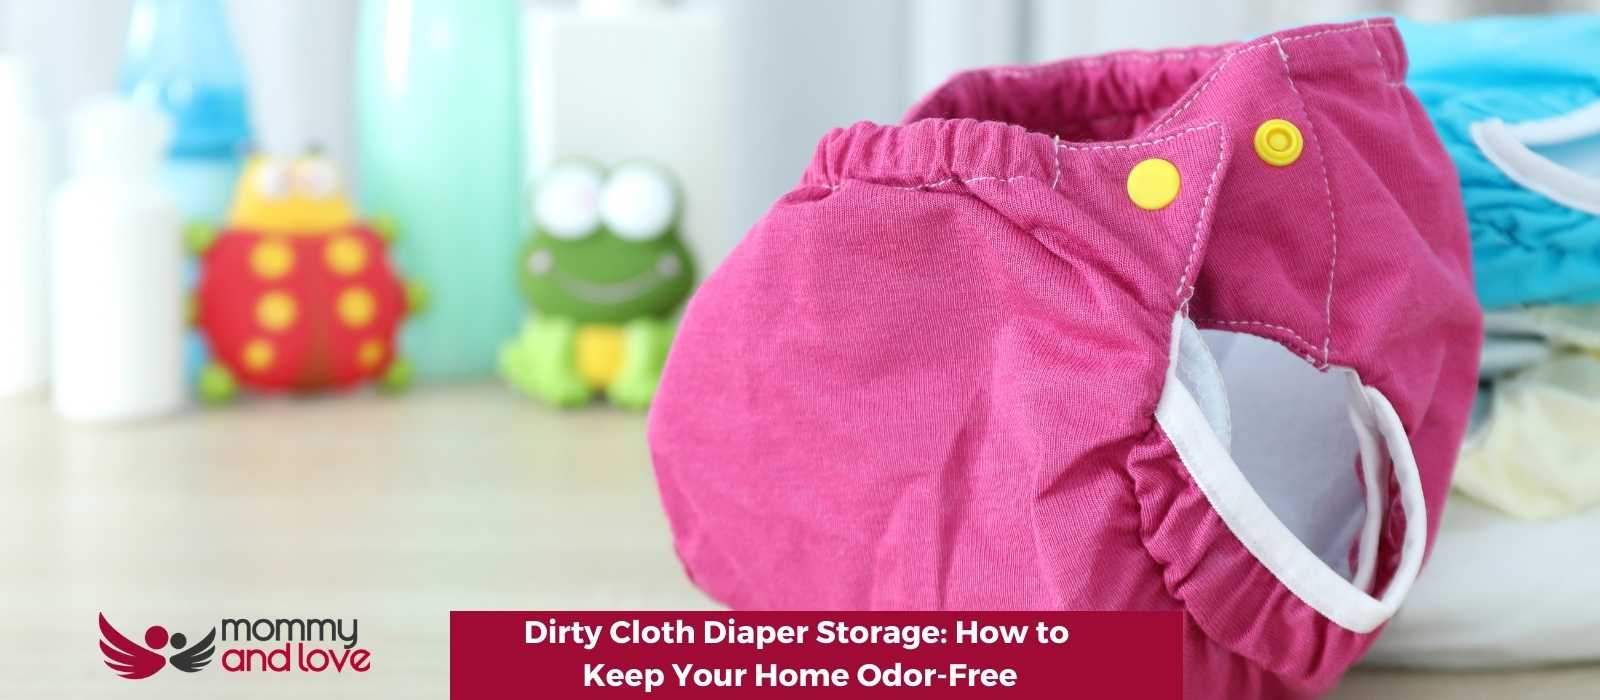 Dirty Cloth Diaper Storage How to Keep Your Home Odor-Free